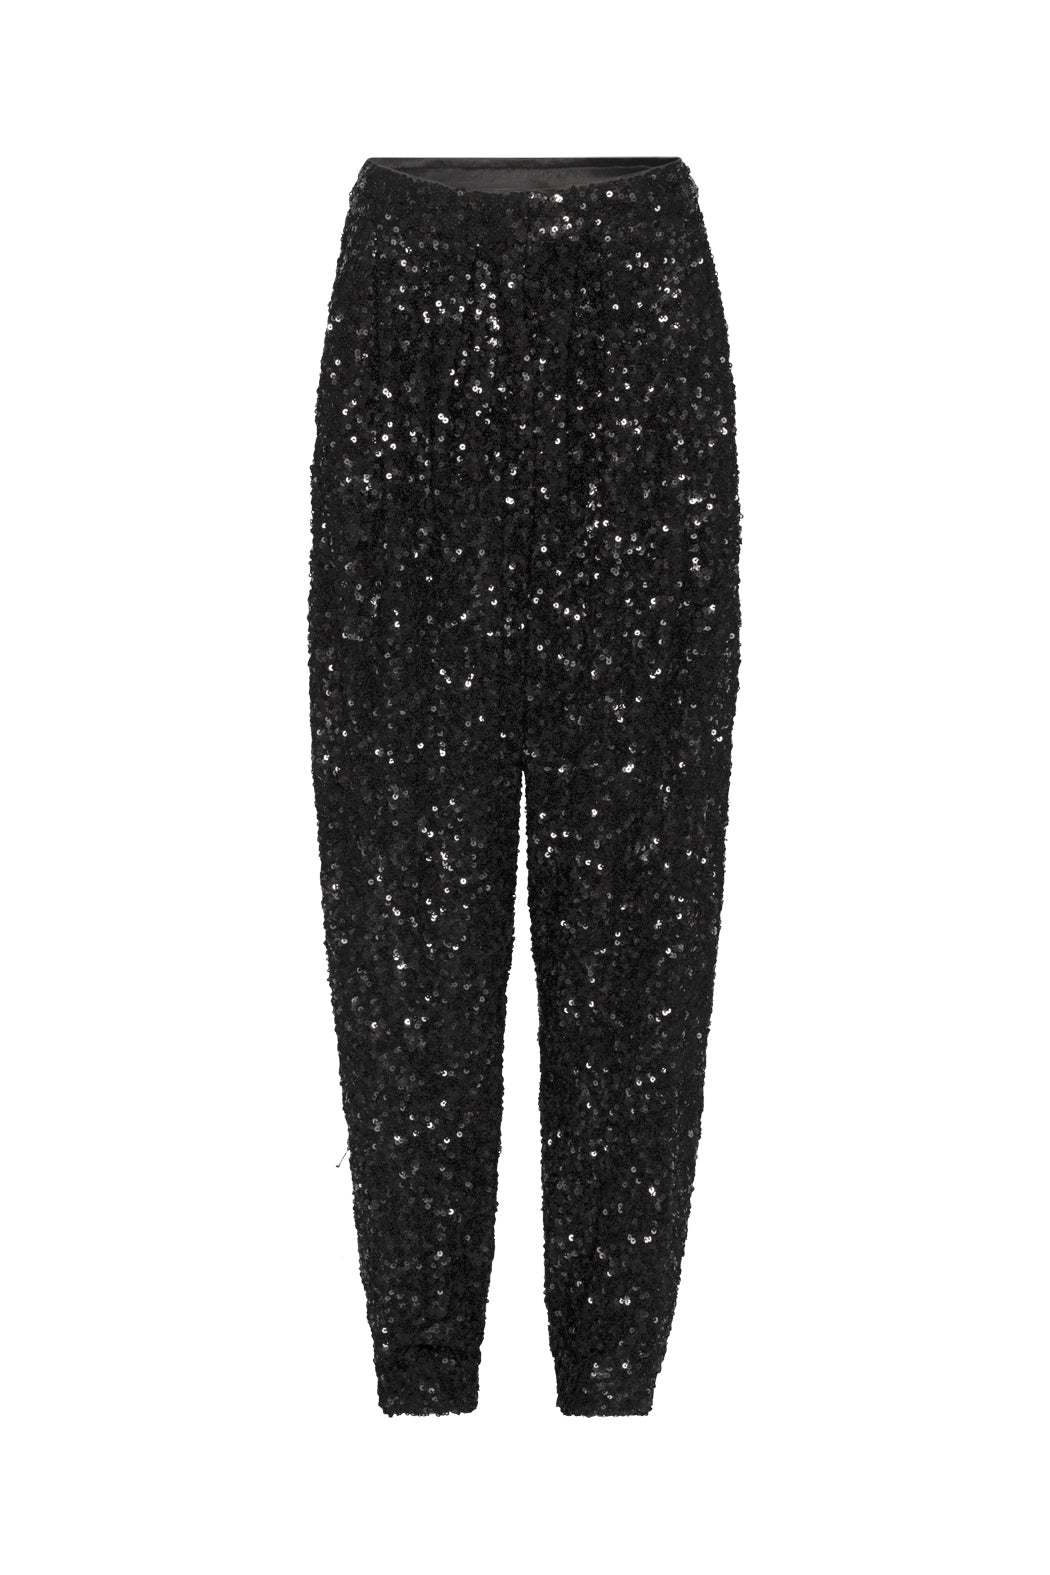 Sequin design tapered trousers, black